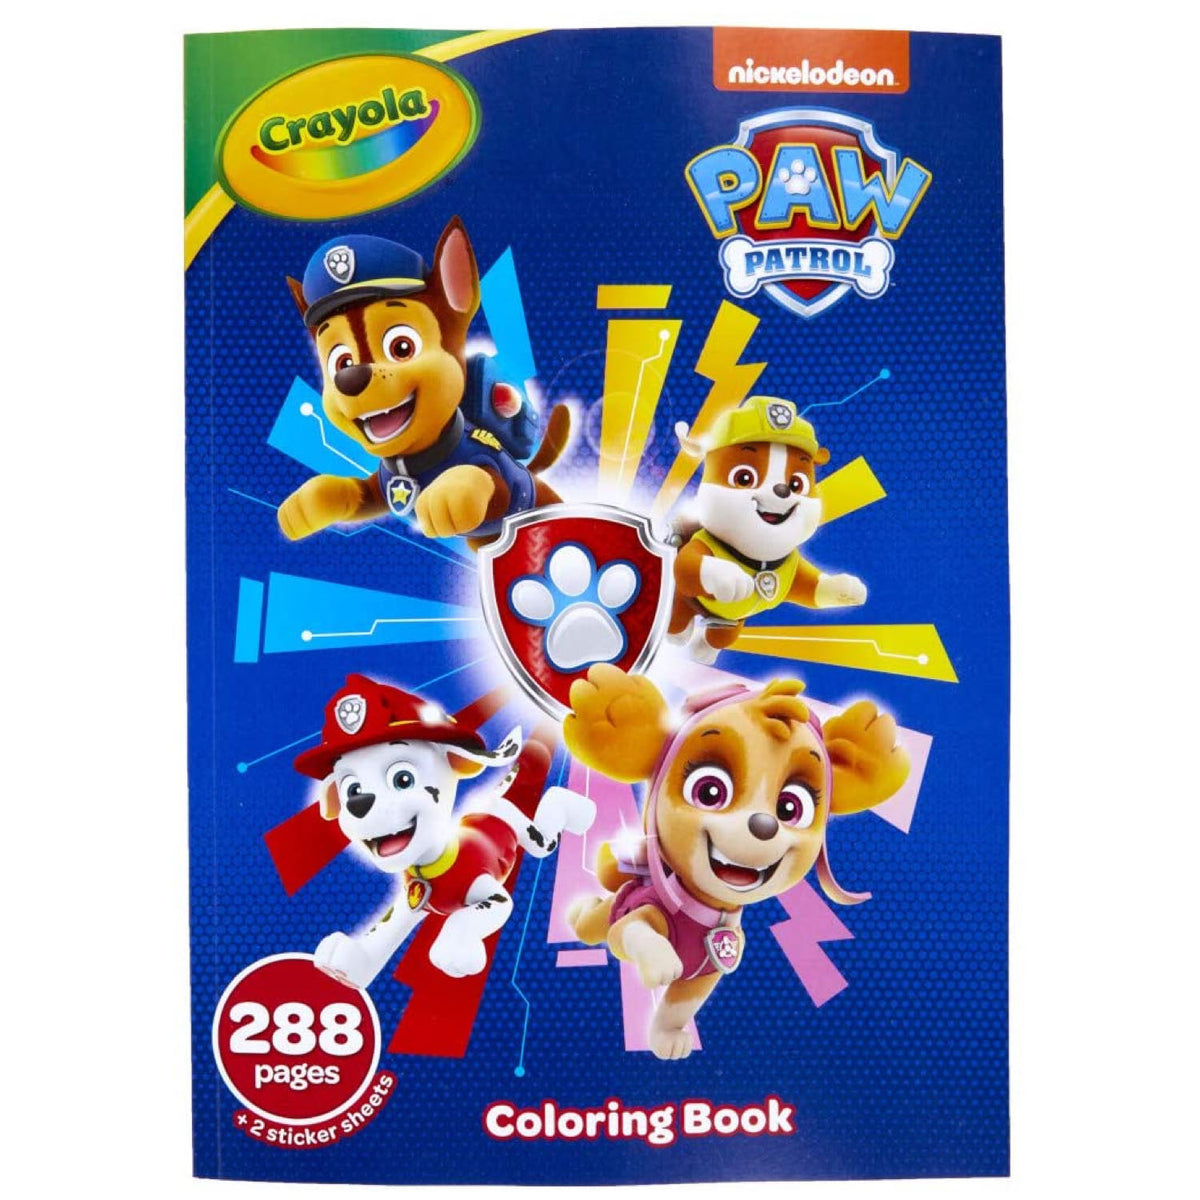 Crayola Pokemon Giant Coloring Pages, 18 Coloring Pages, Gifts for Kids,  Ages 3+